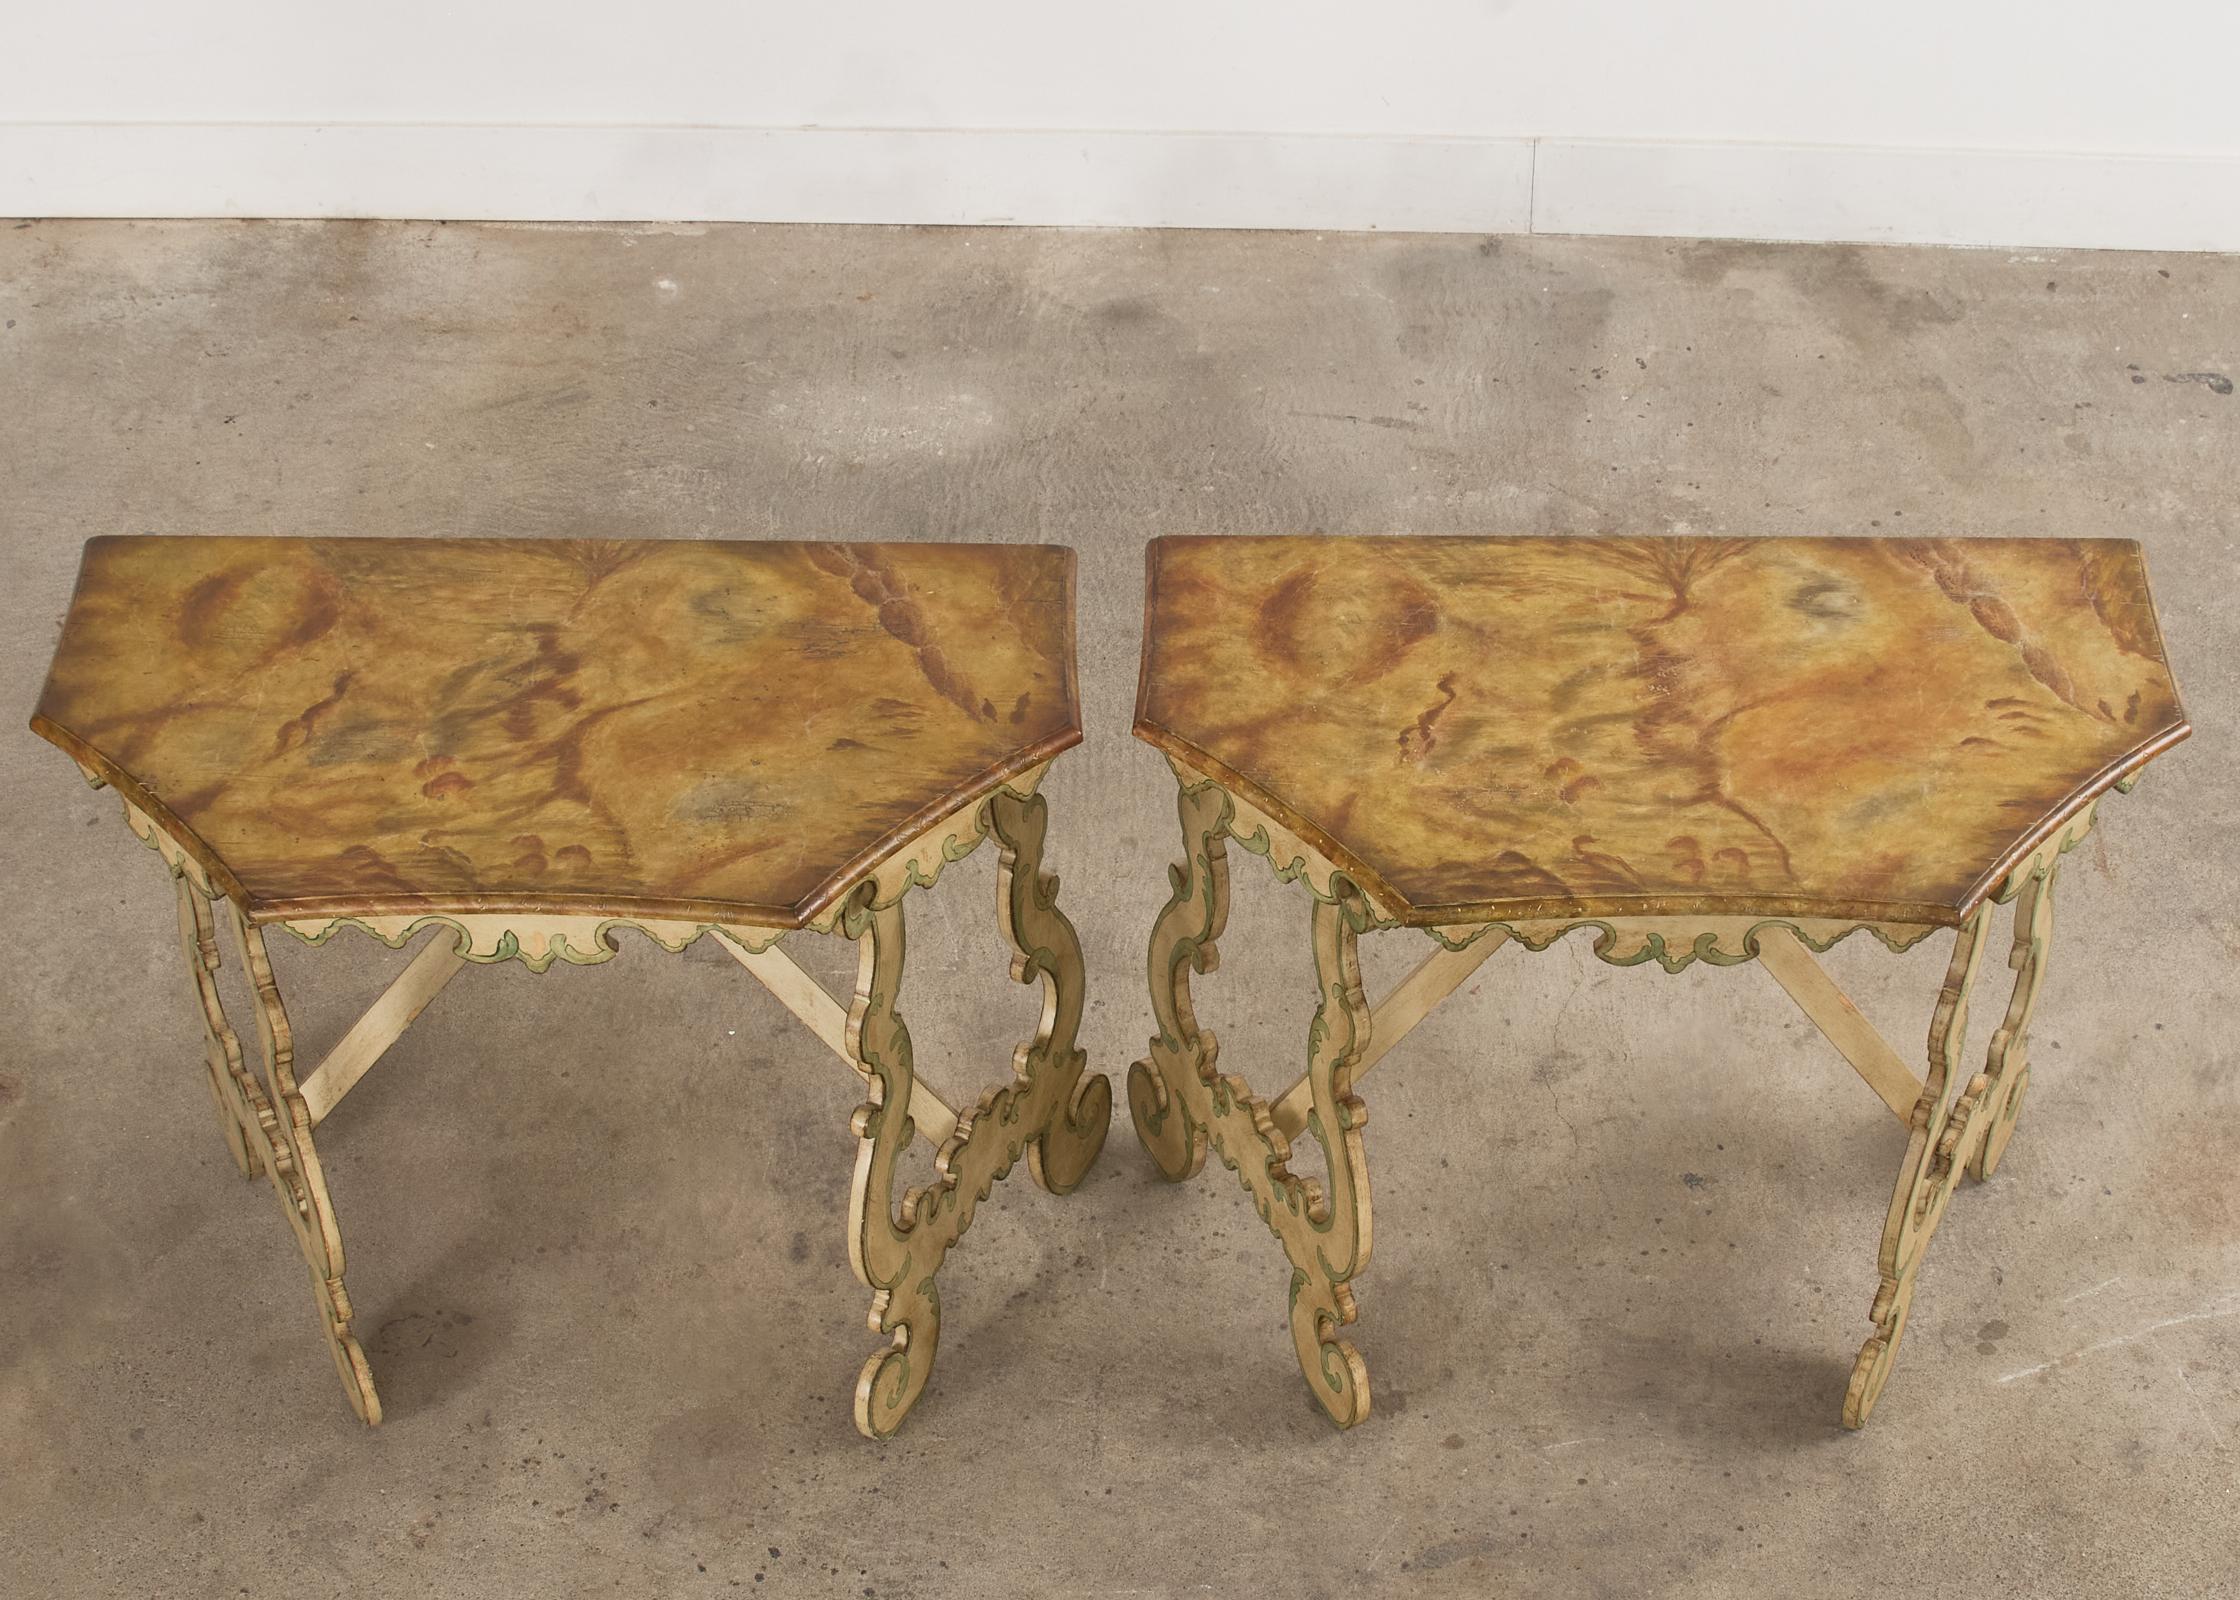 Pair of Italian Baroque Style Painted Faux Marble Top Consoles In Good Condition For Sale In Rio Vista, CA